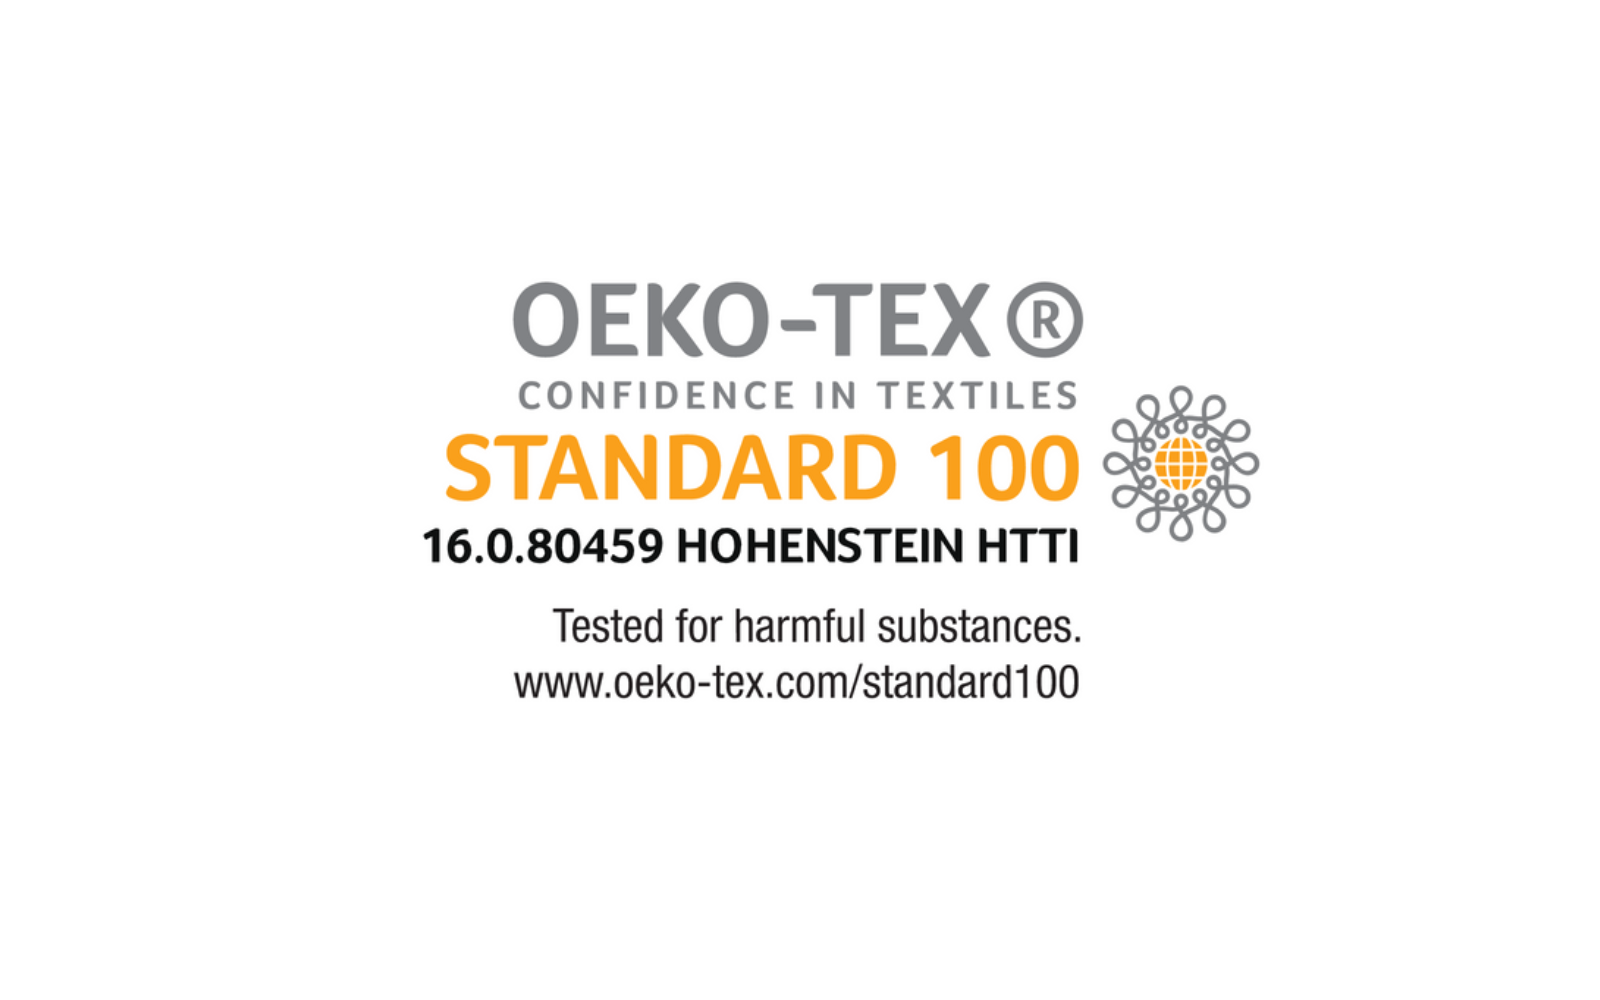 OEKO-TEX Certification - tested for harmful substances